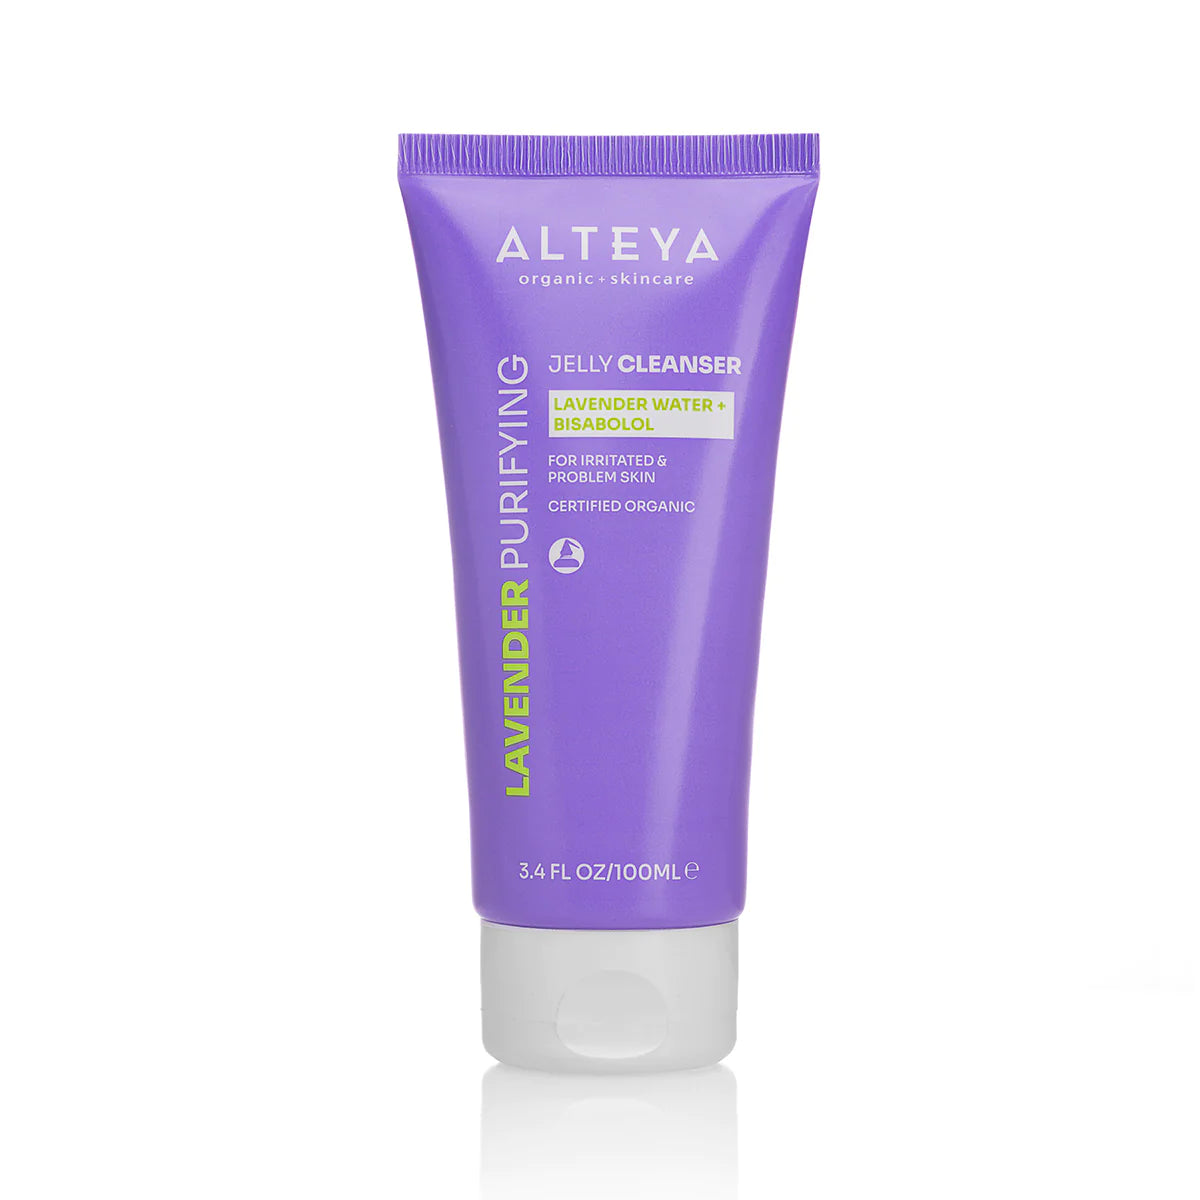 A tube of Alteya Organics Lavender Purifying Jelly Cleanser, enriched with organic lavender water for a purifying and soothing cleansing experience.